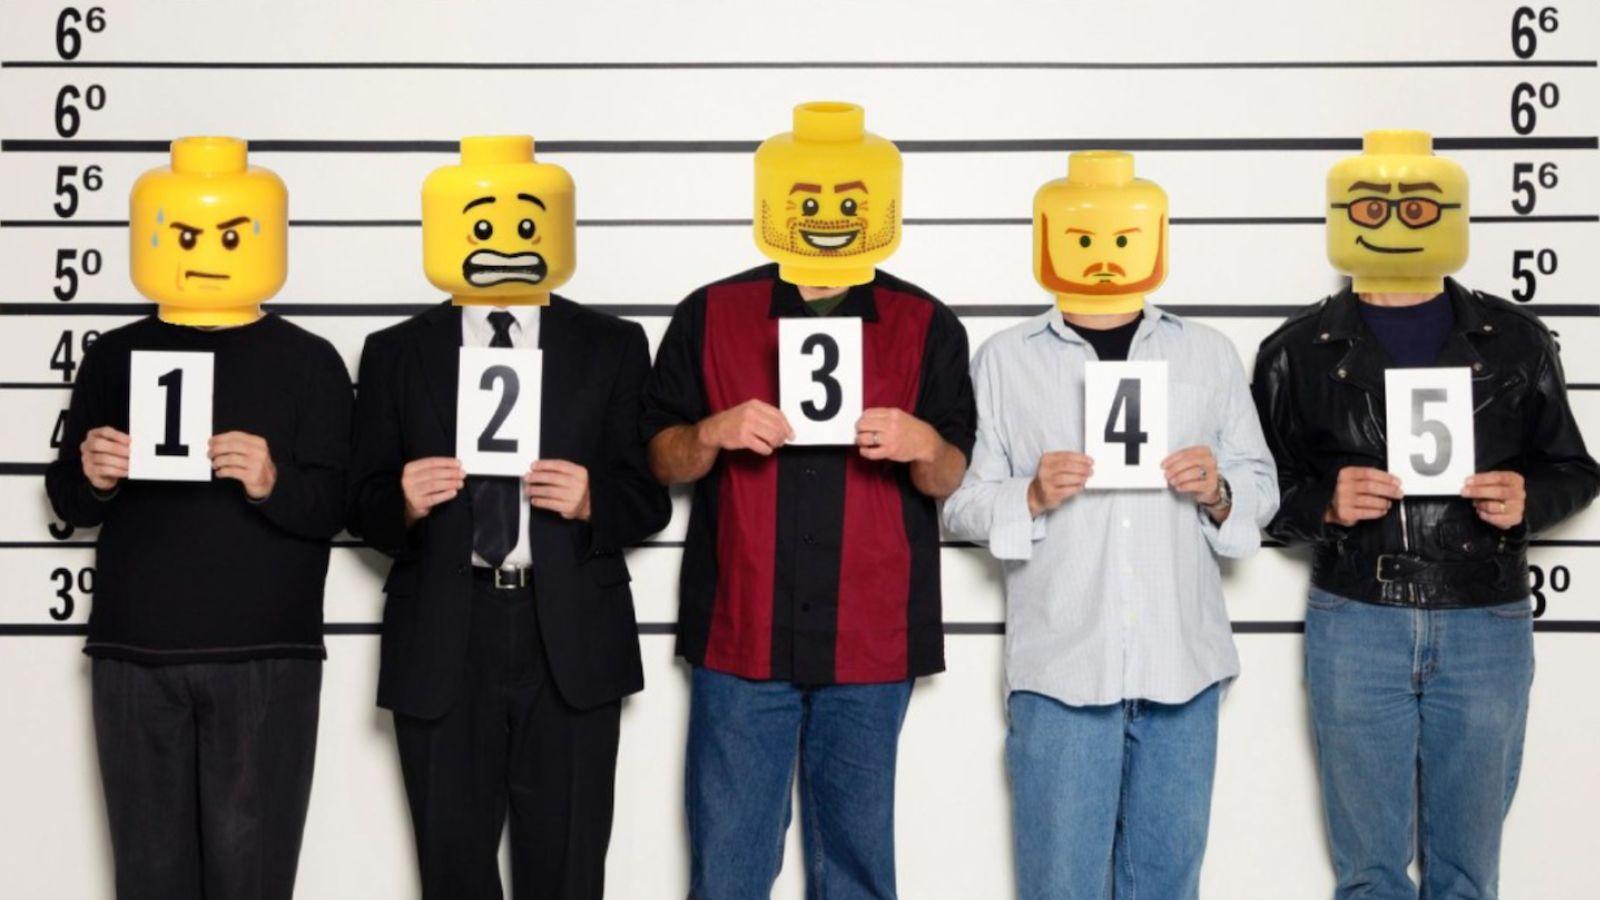 Police department cover suspects with Lego heads